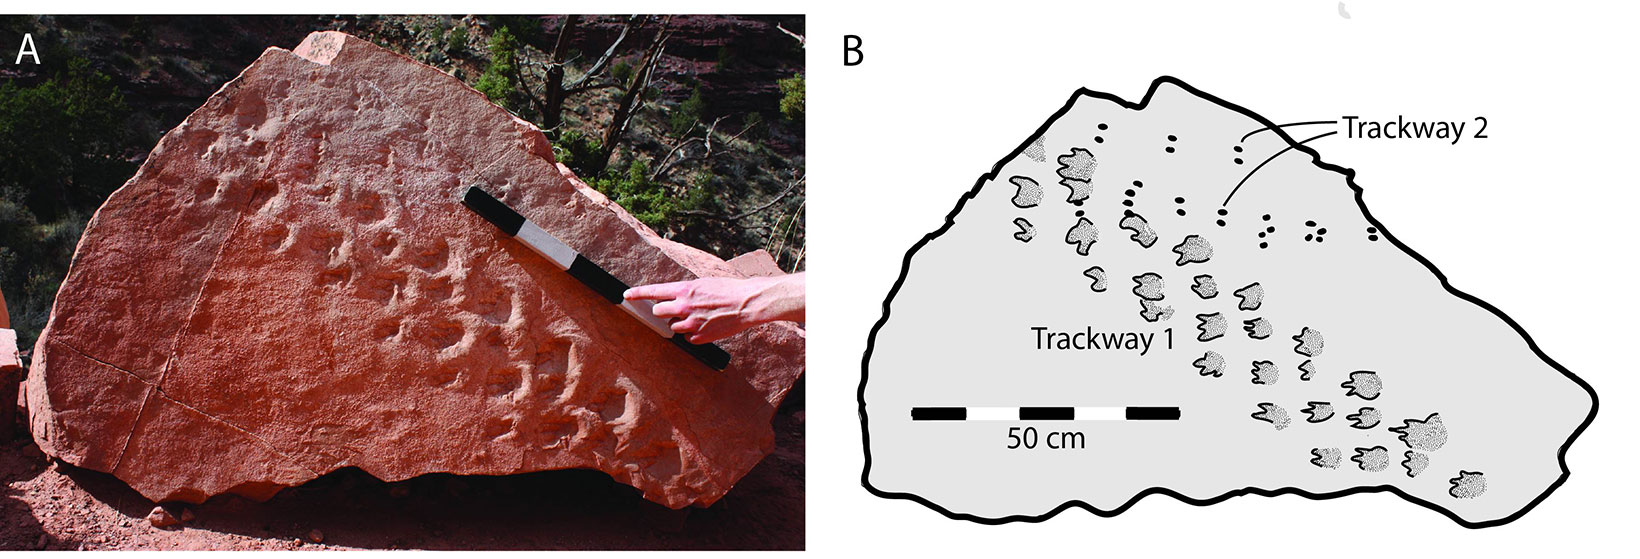 2-panel figure from a published paper showing a Pennsylvanian amniote trackway from the Grand Canyon. Panel 1: Set of tracks in a diagonal path across a block of reddish rock; a hand holds a scale bar (scale in decimeters). Panel 2: Drawing of the same rock with trackway, pointing out a second trackway intersecting the main set of tracks. Scale is 50 centimeters.